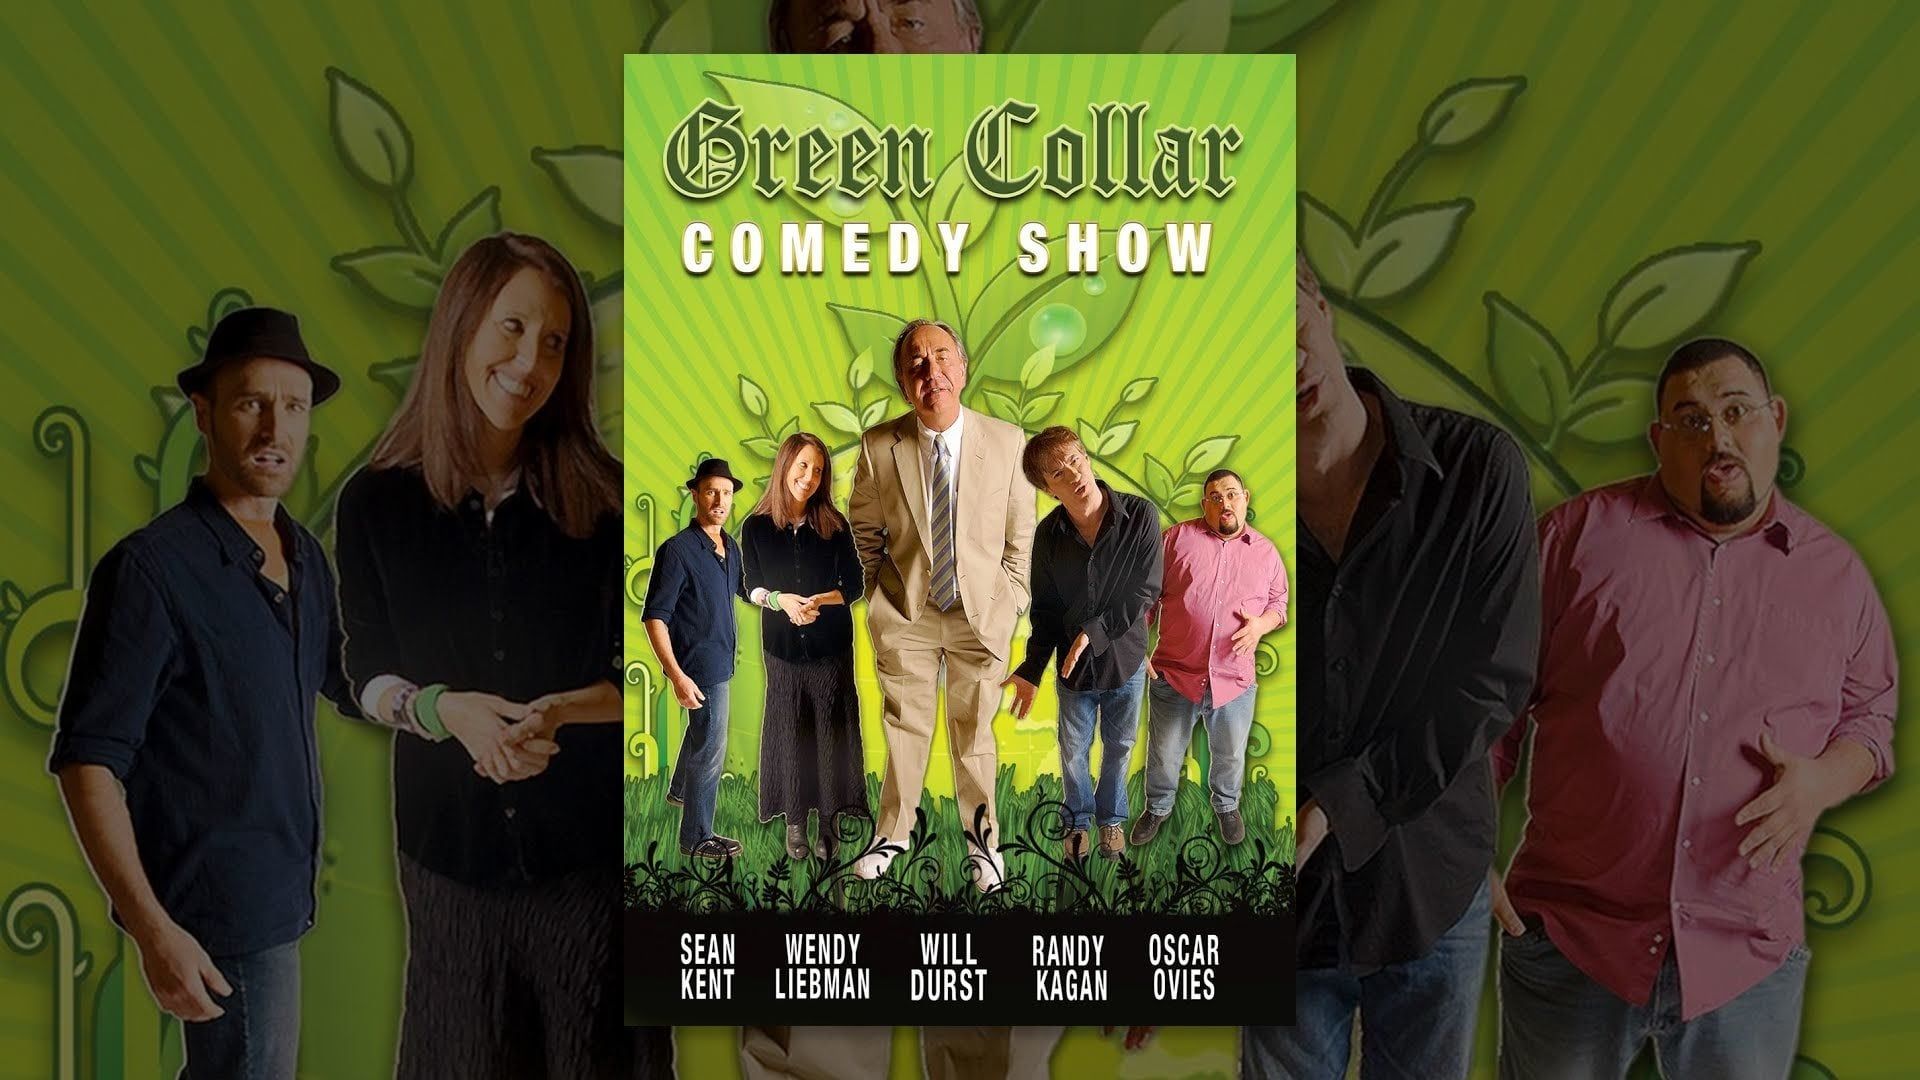 Green Collar Comedy Show background